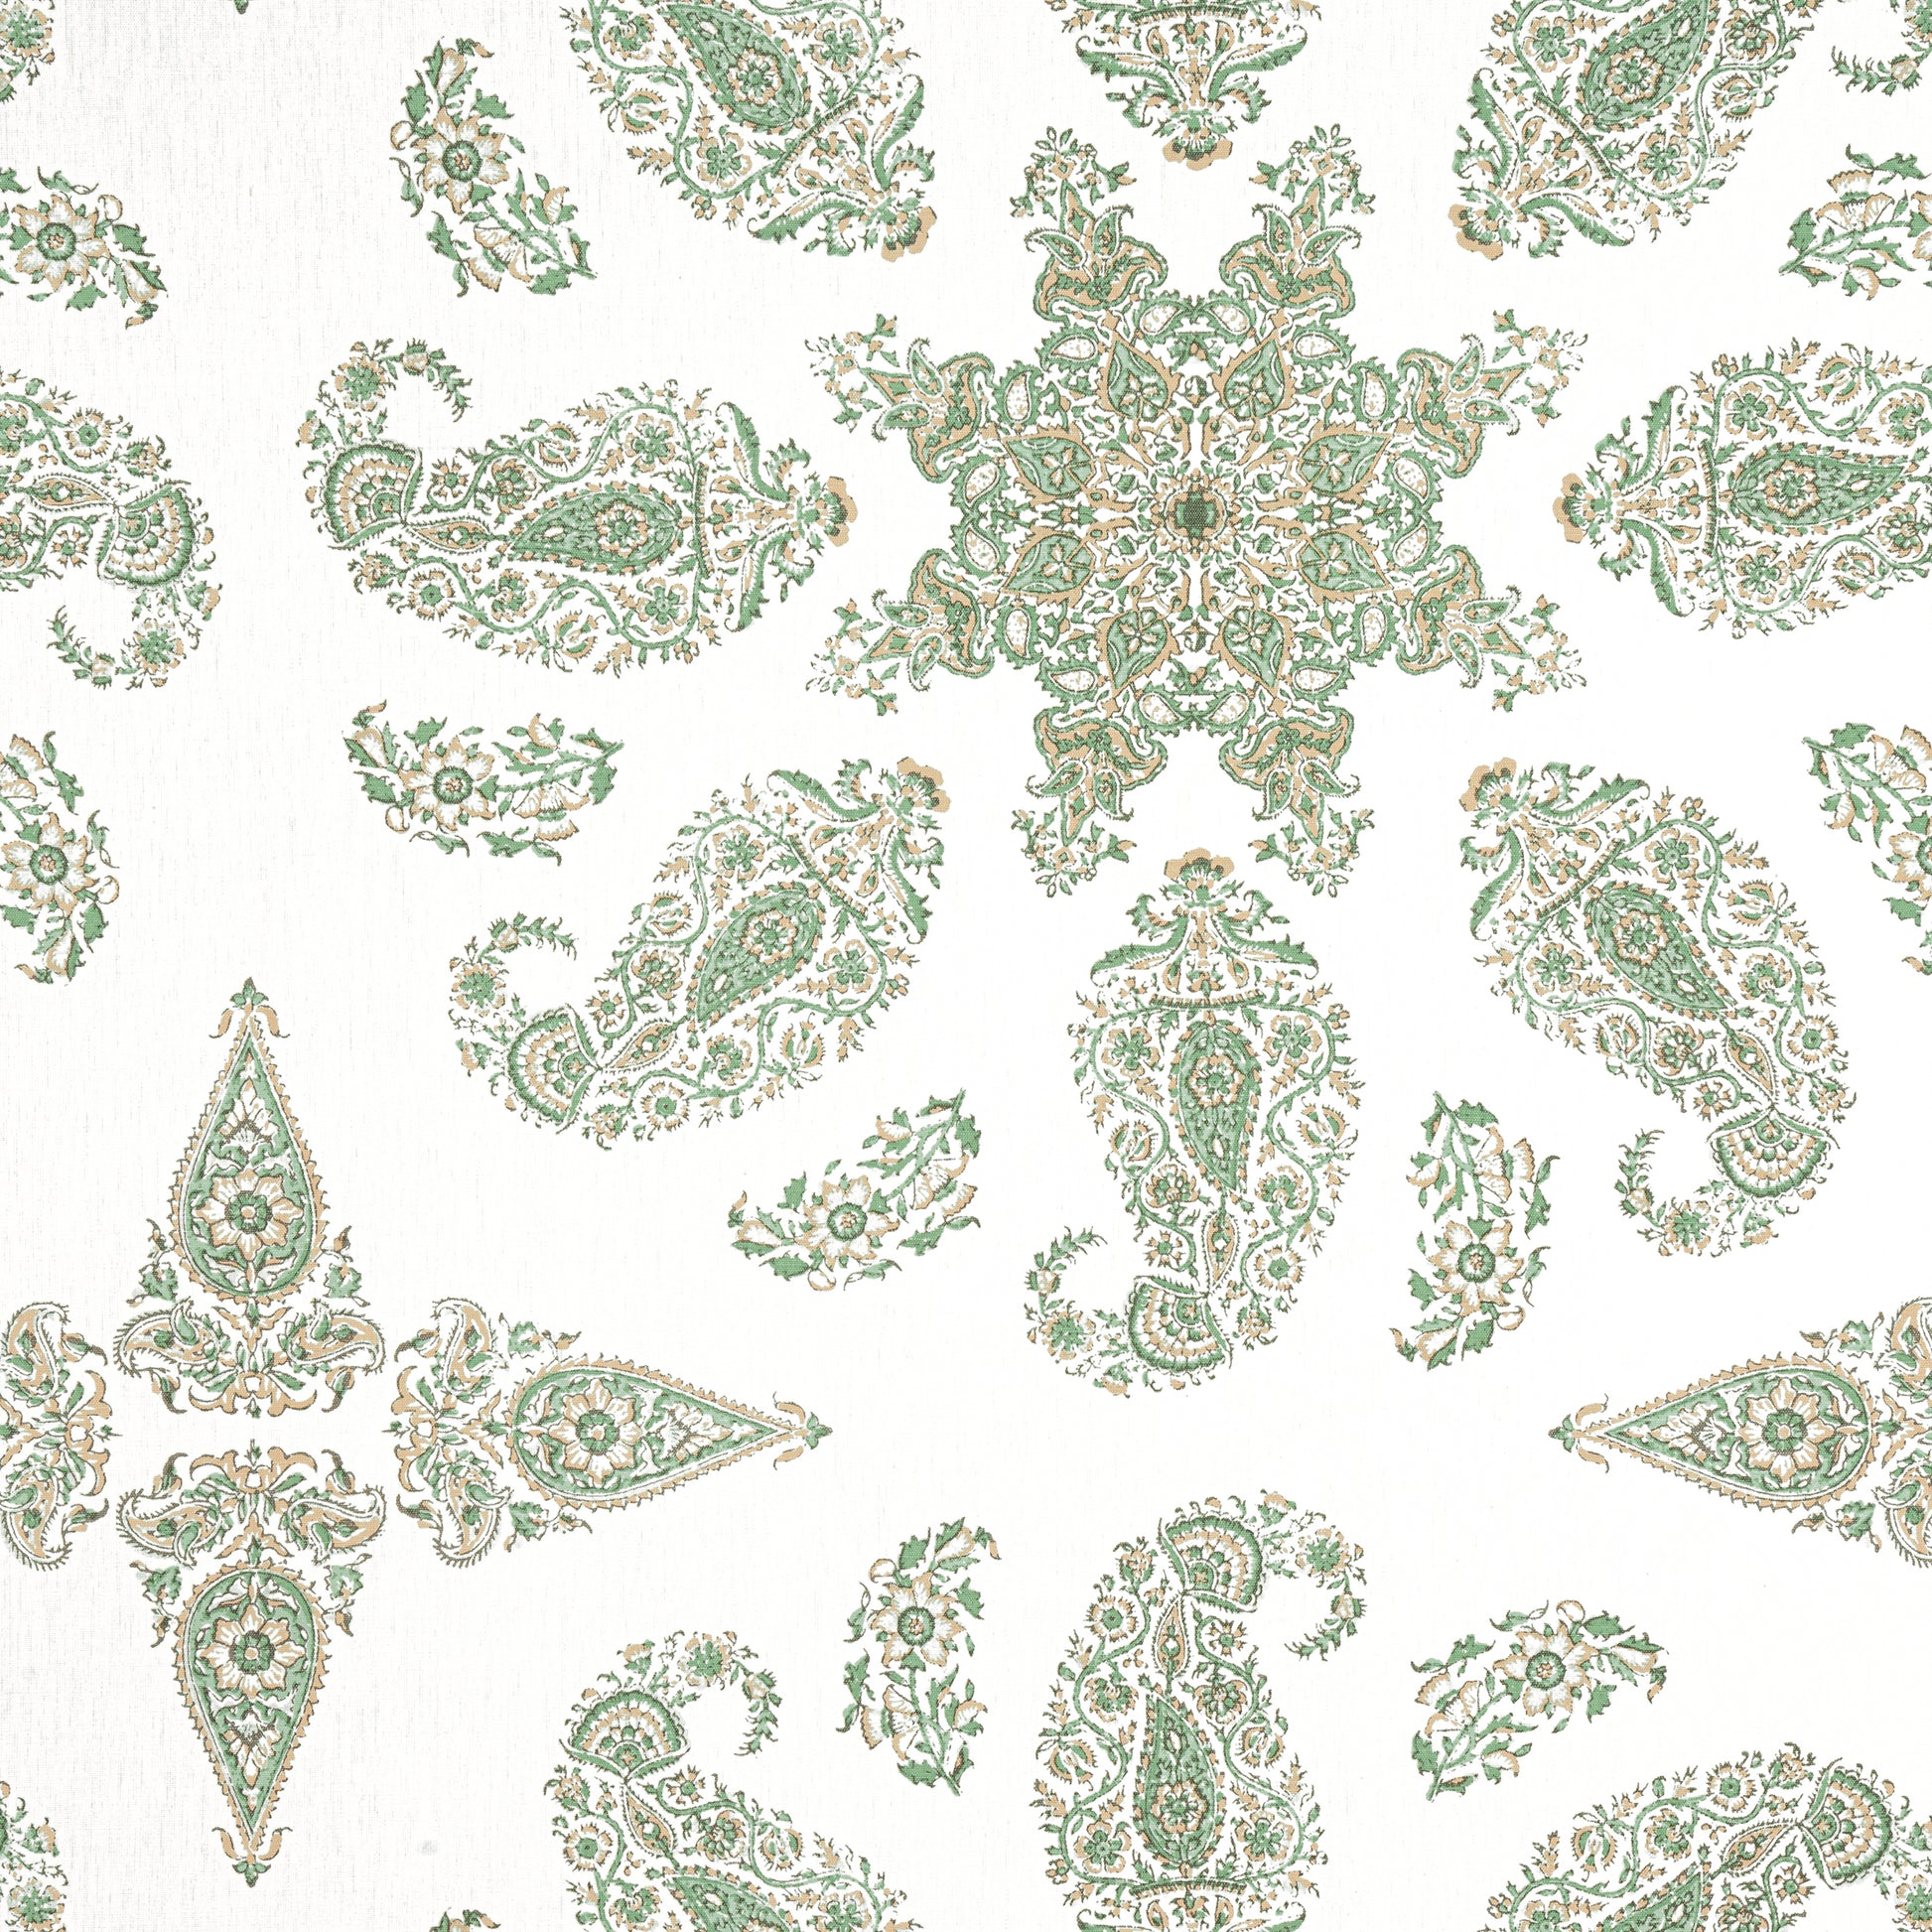 Purchase Thibaut Fabric Pattern number F936442 pattern name East India color Green and White